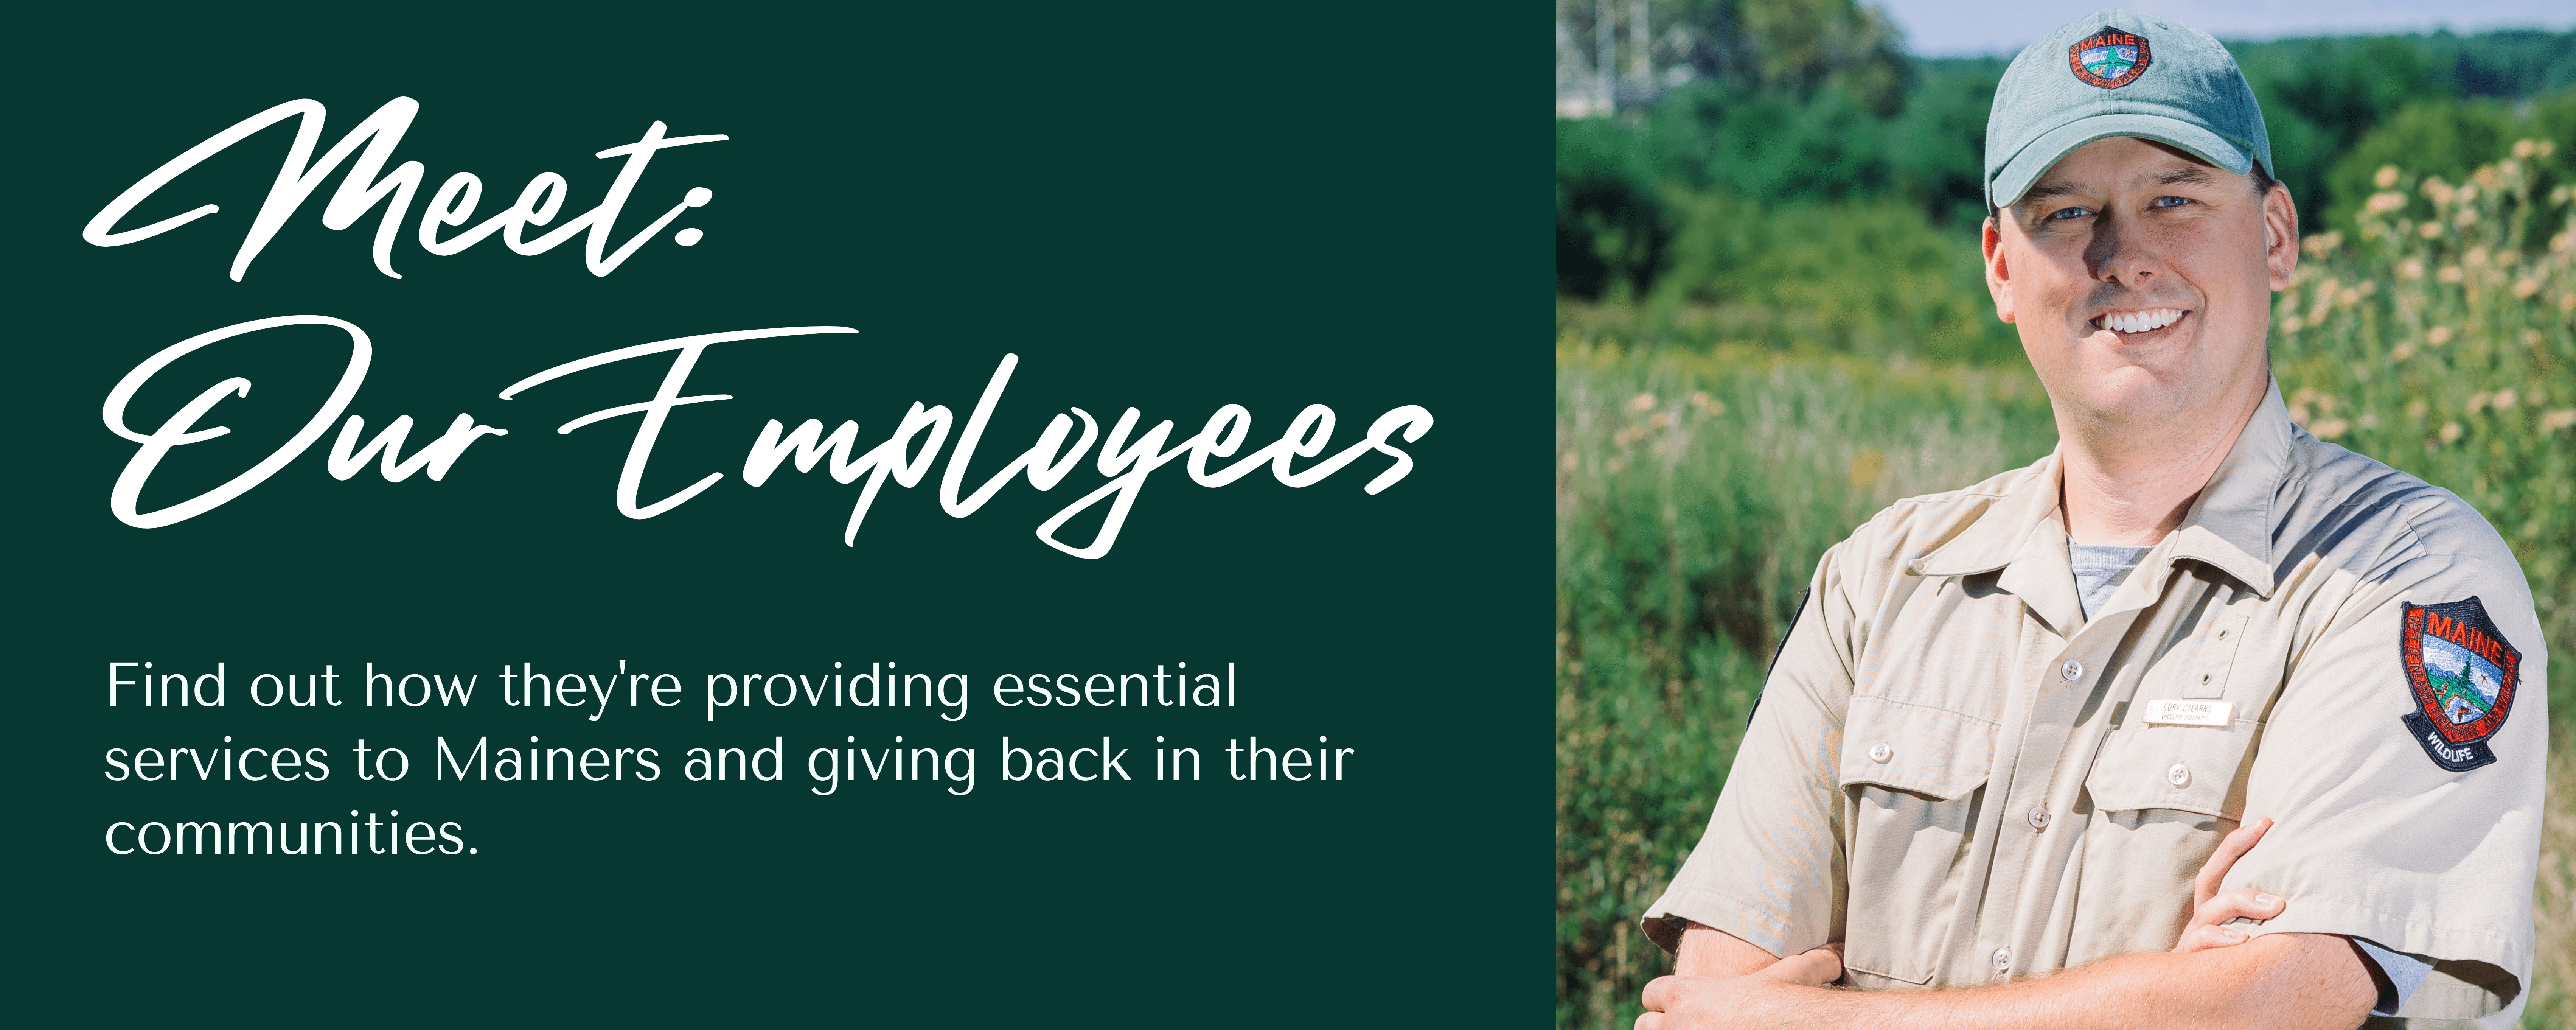 Meet: Our Employees. Find out how they're providing essential services to Mainers and giving back in their communities.